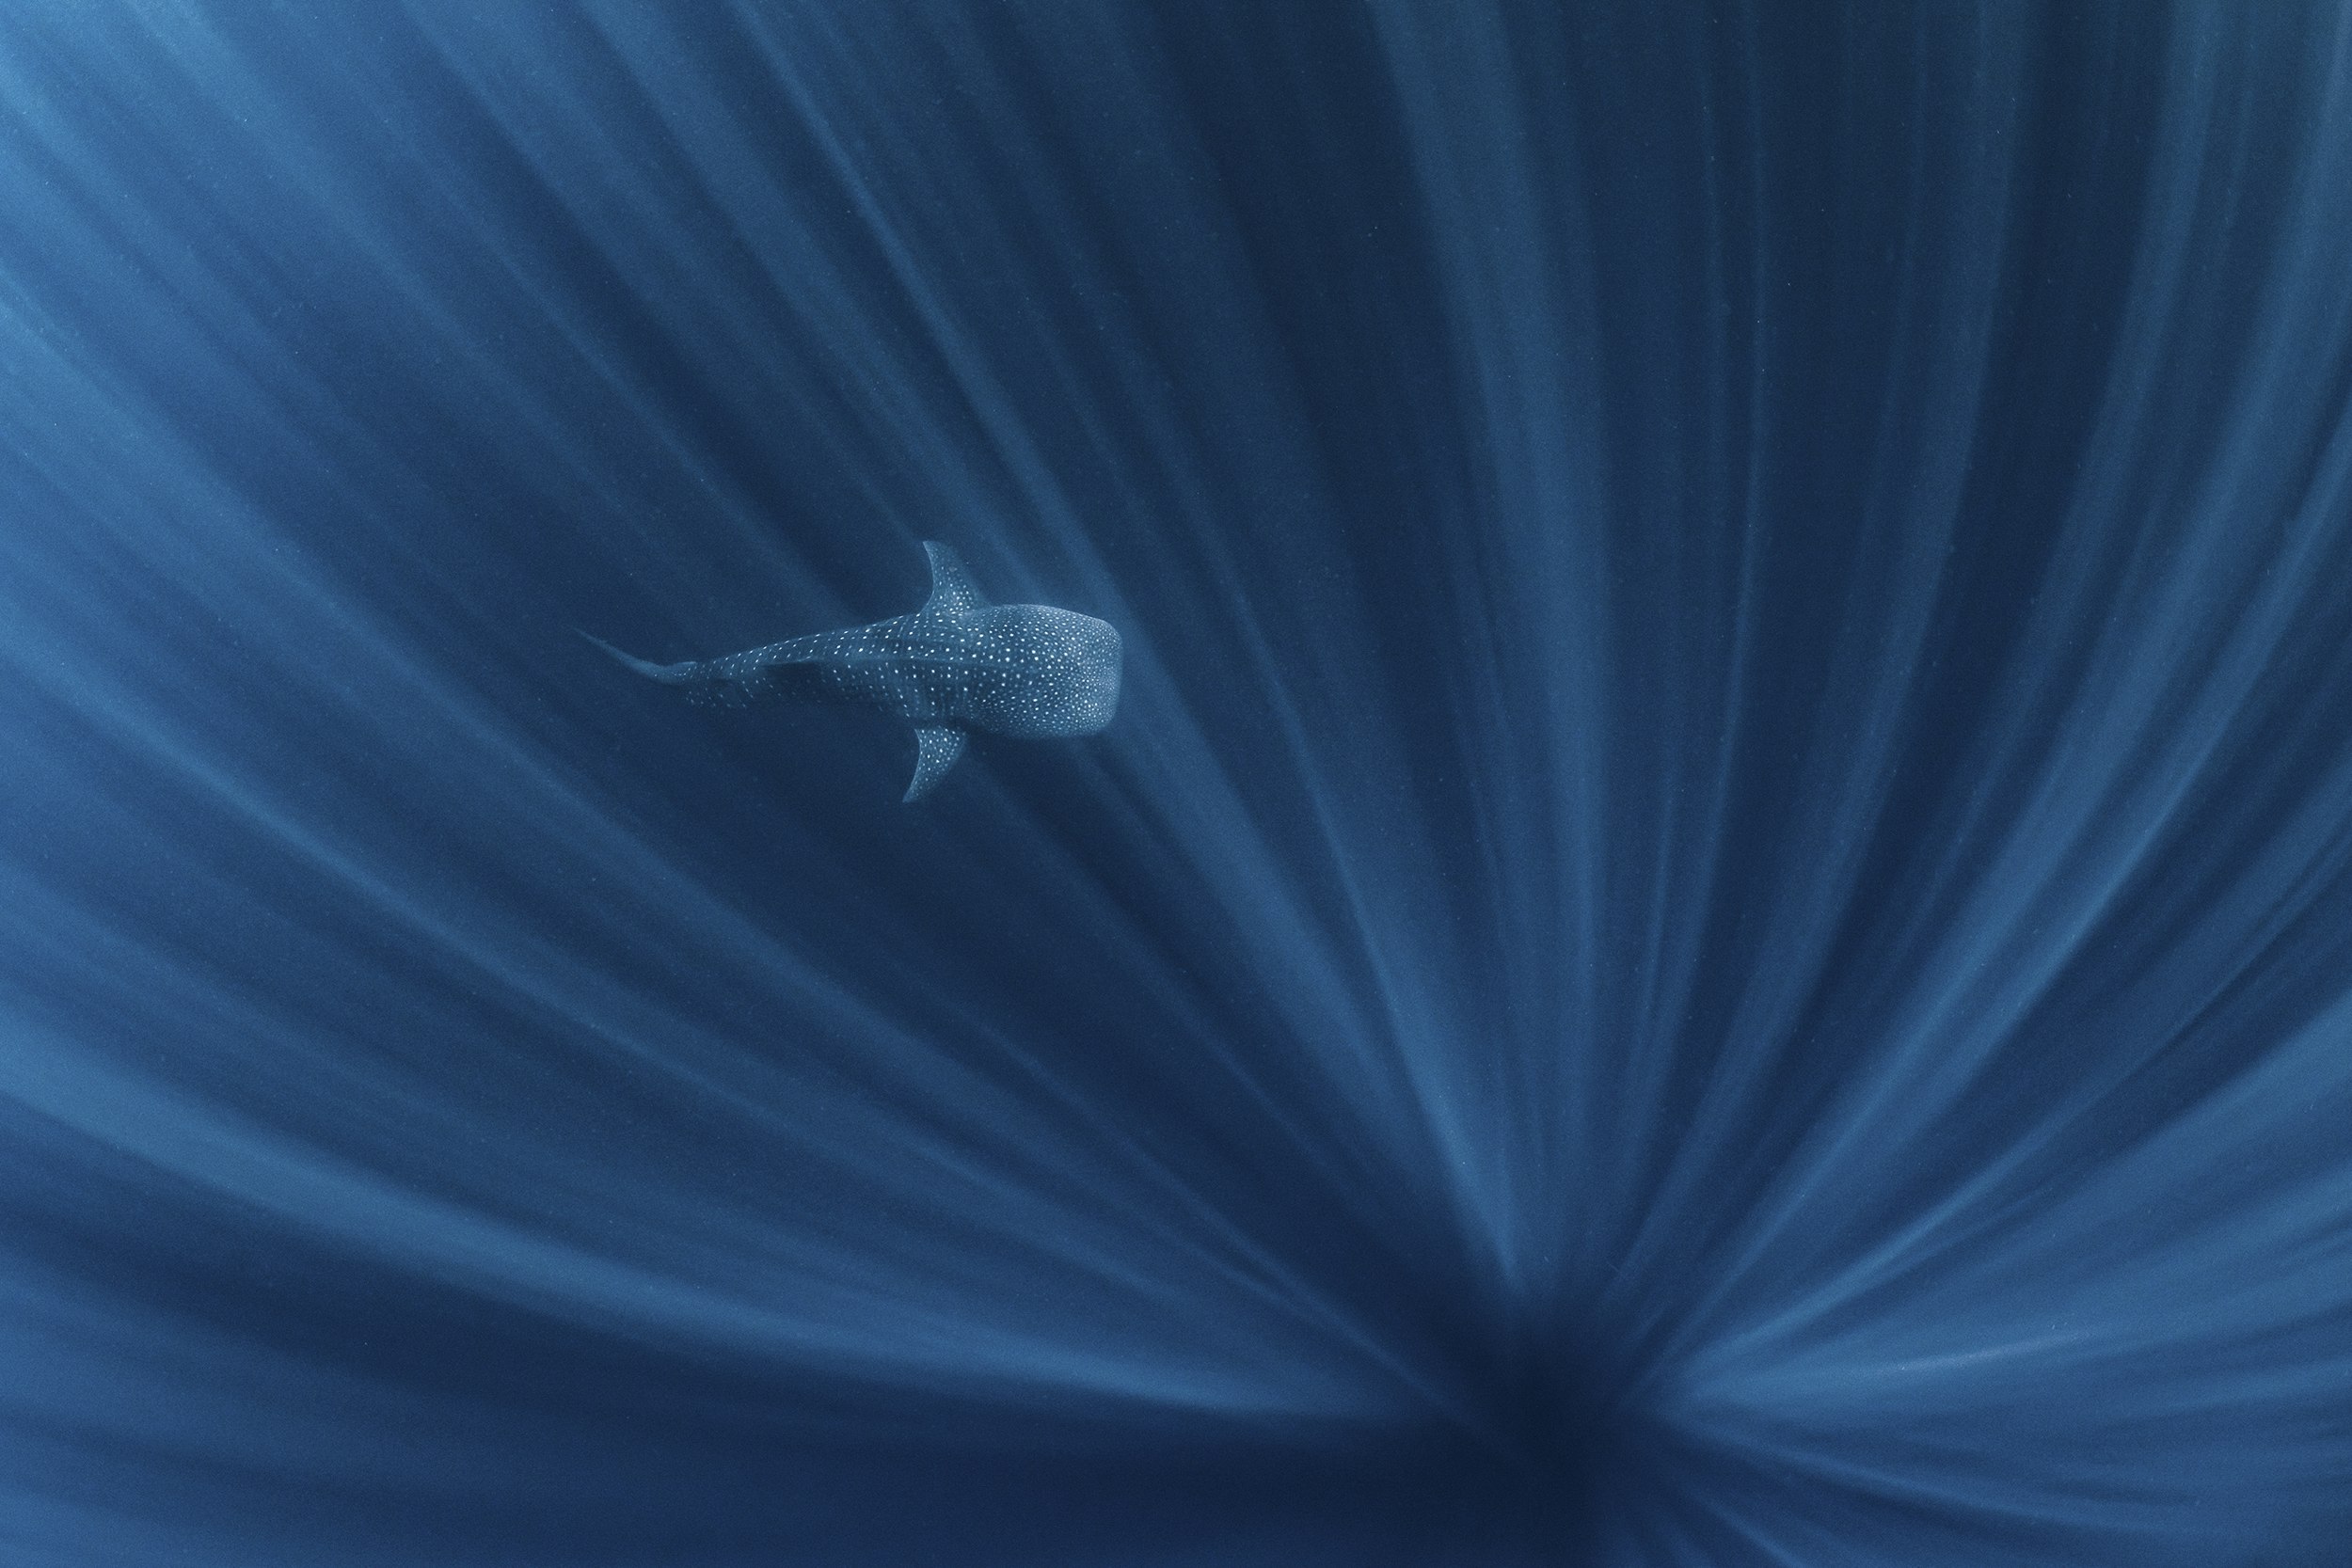 An underwater picture of a whale shark swimming, while rays of light illuminate the scene